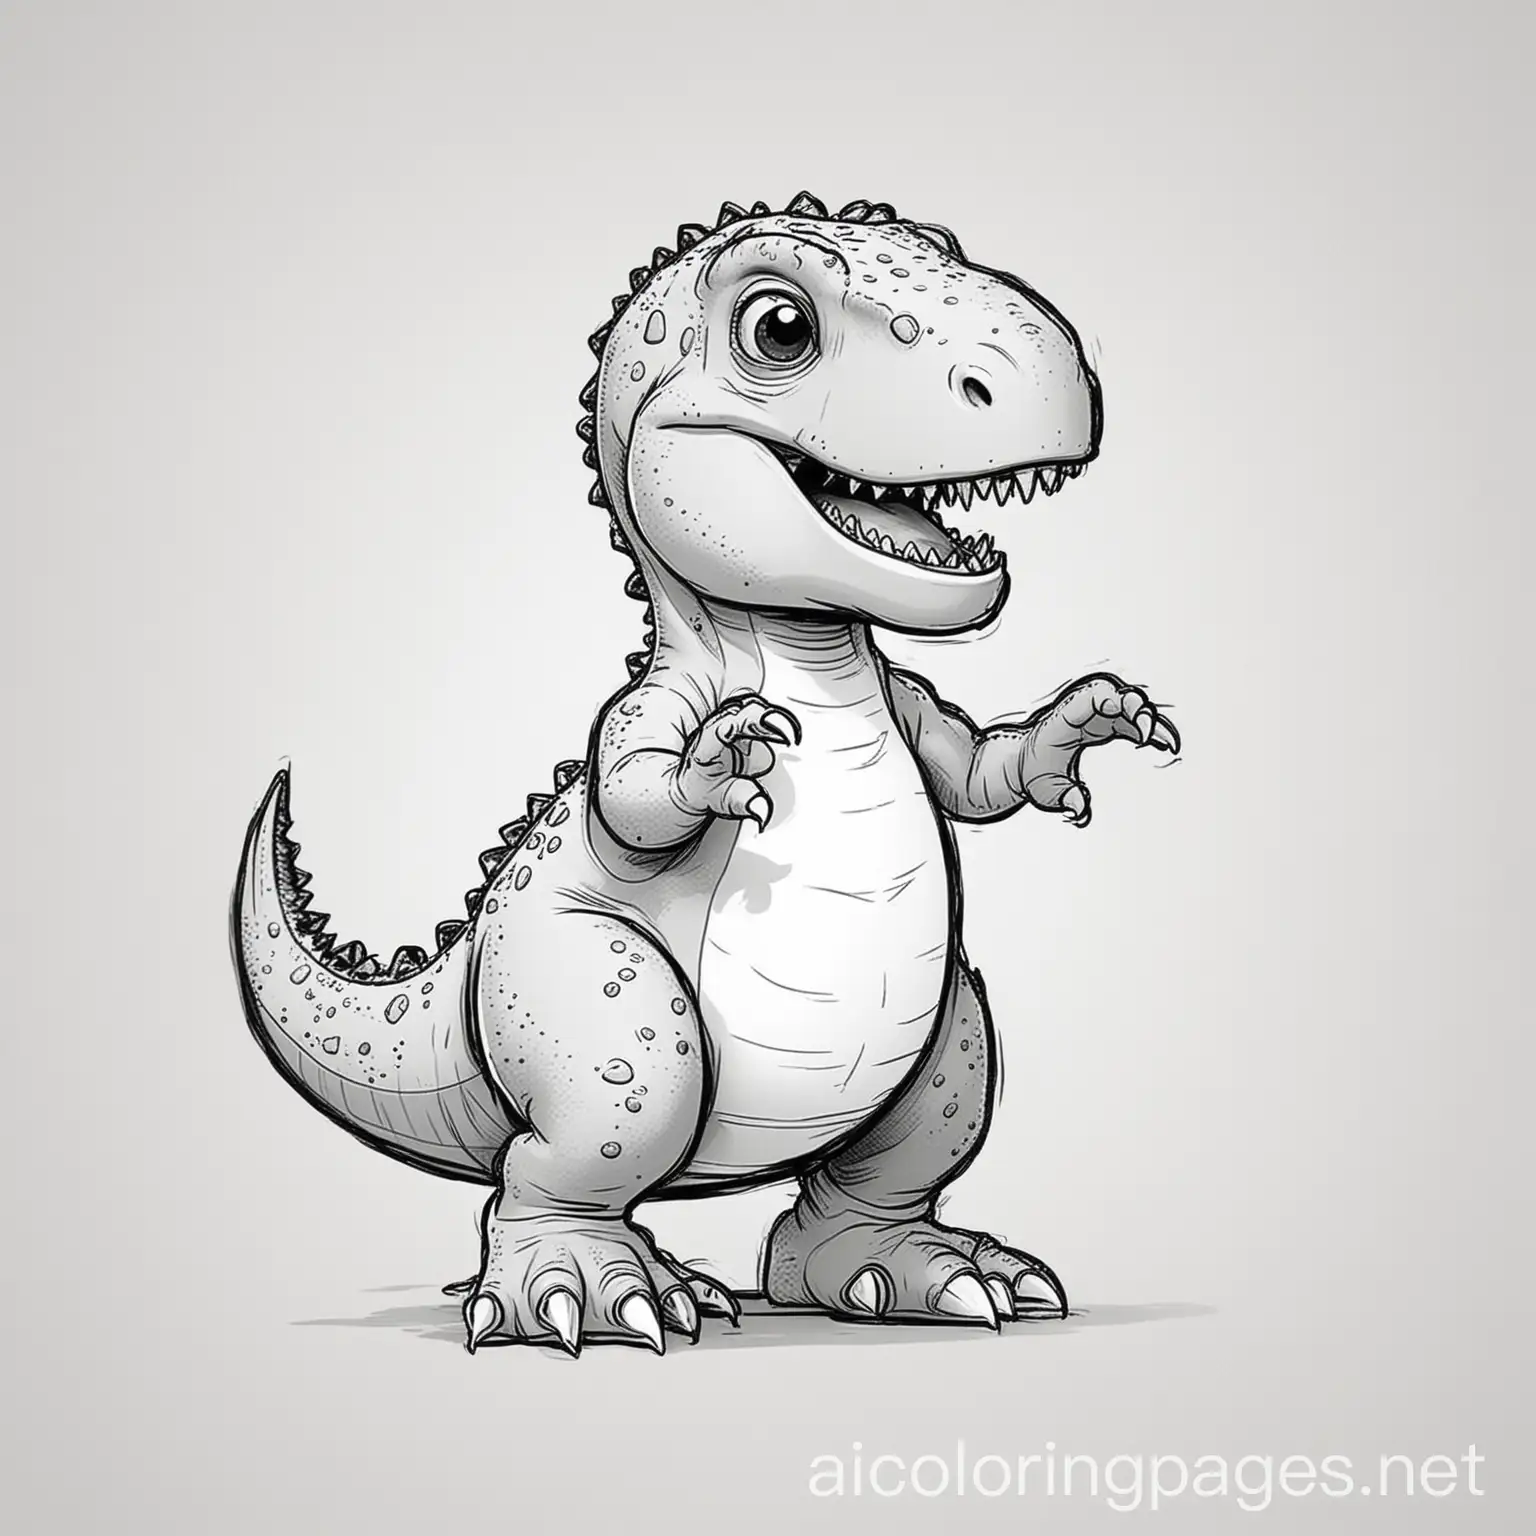 Cute T-Rex with tiny arms black and white image, Coloring Page, black and white, line art, white background, Simplicity, Ample White Space.